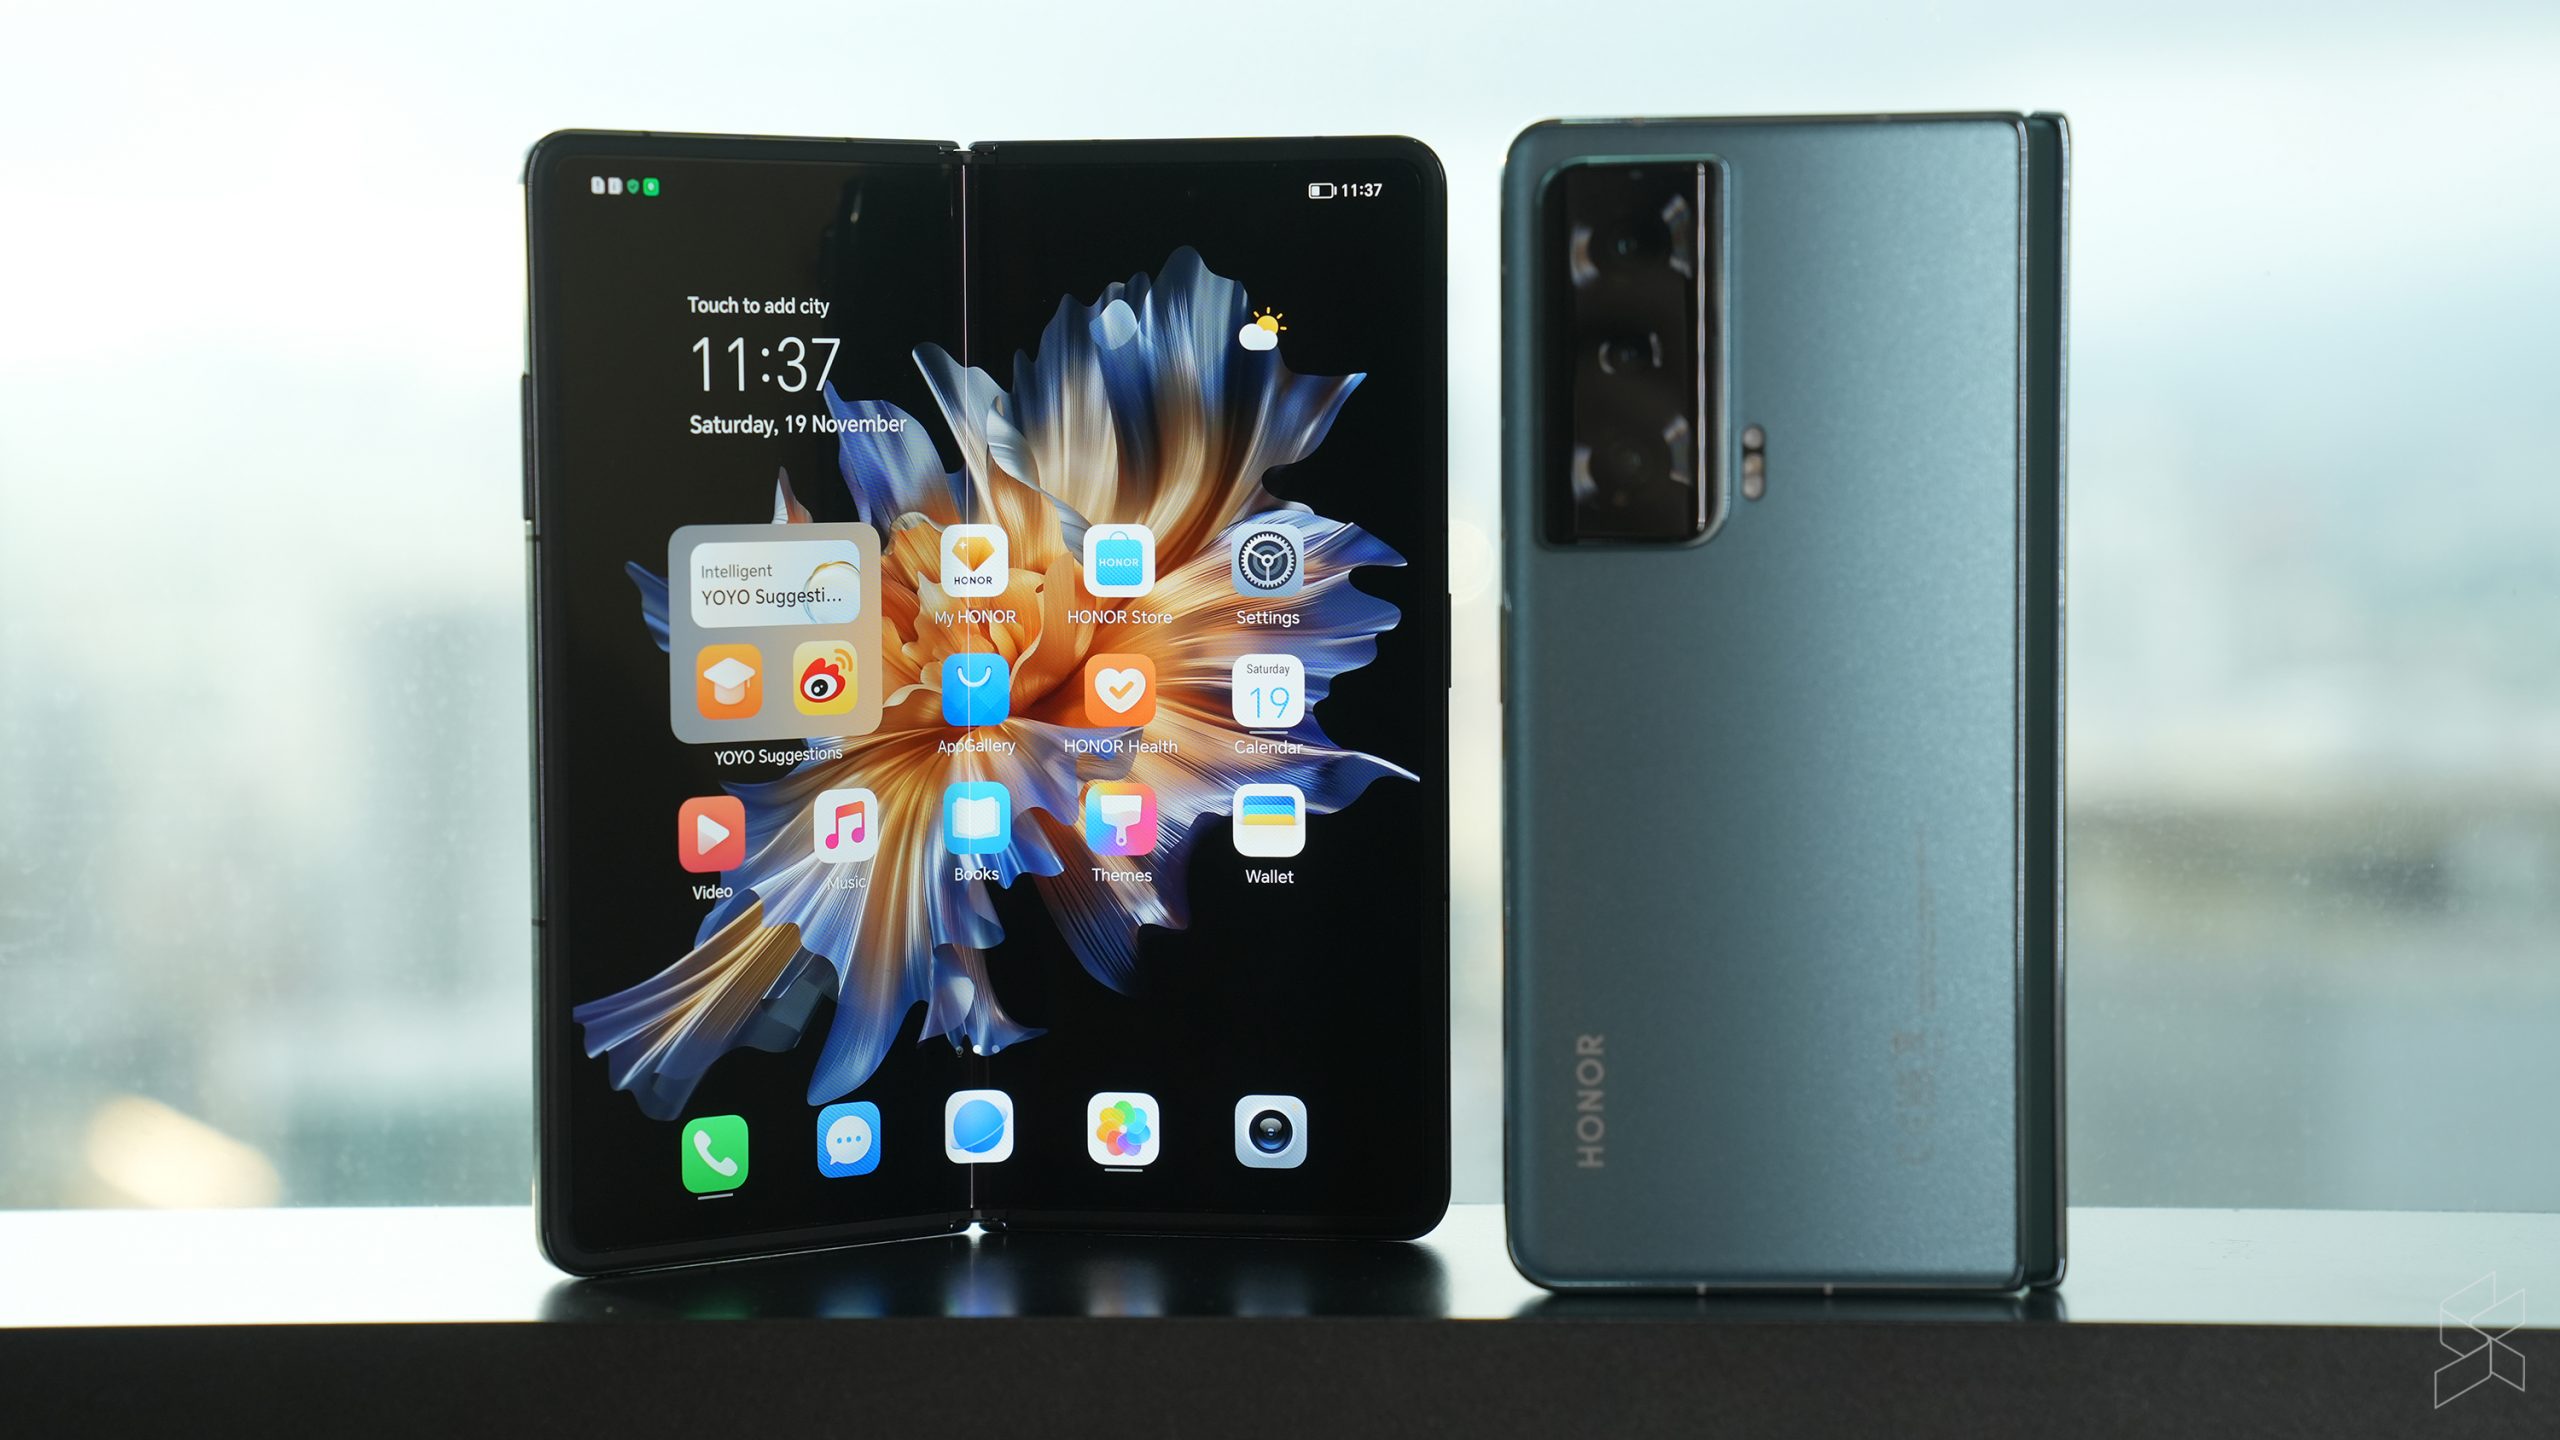 Honor Magic Vs will be sold outside of China, will it come to Malaysia